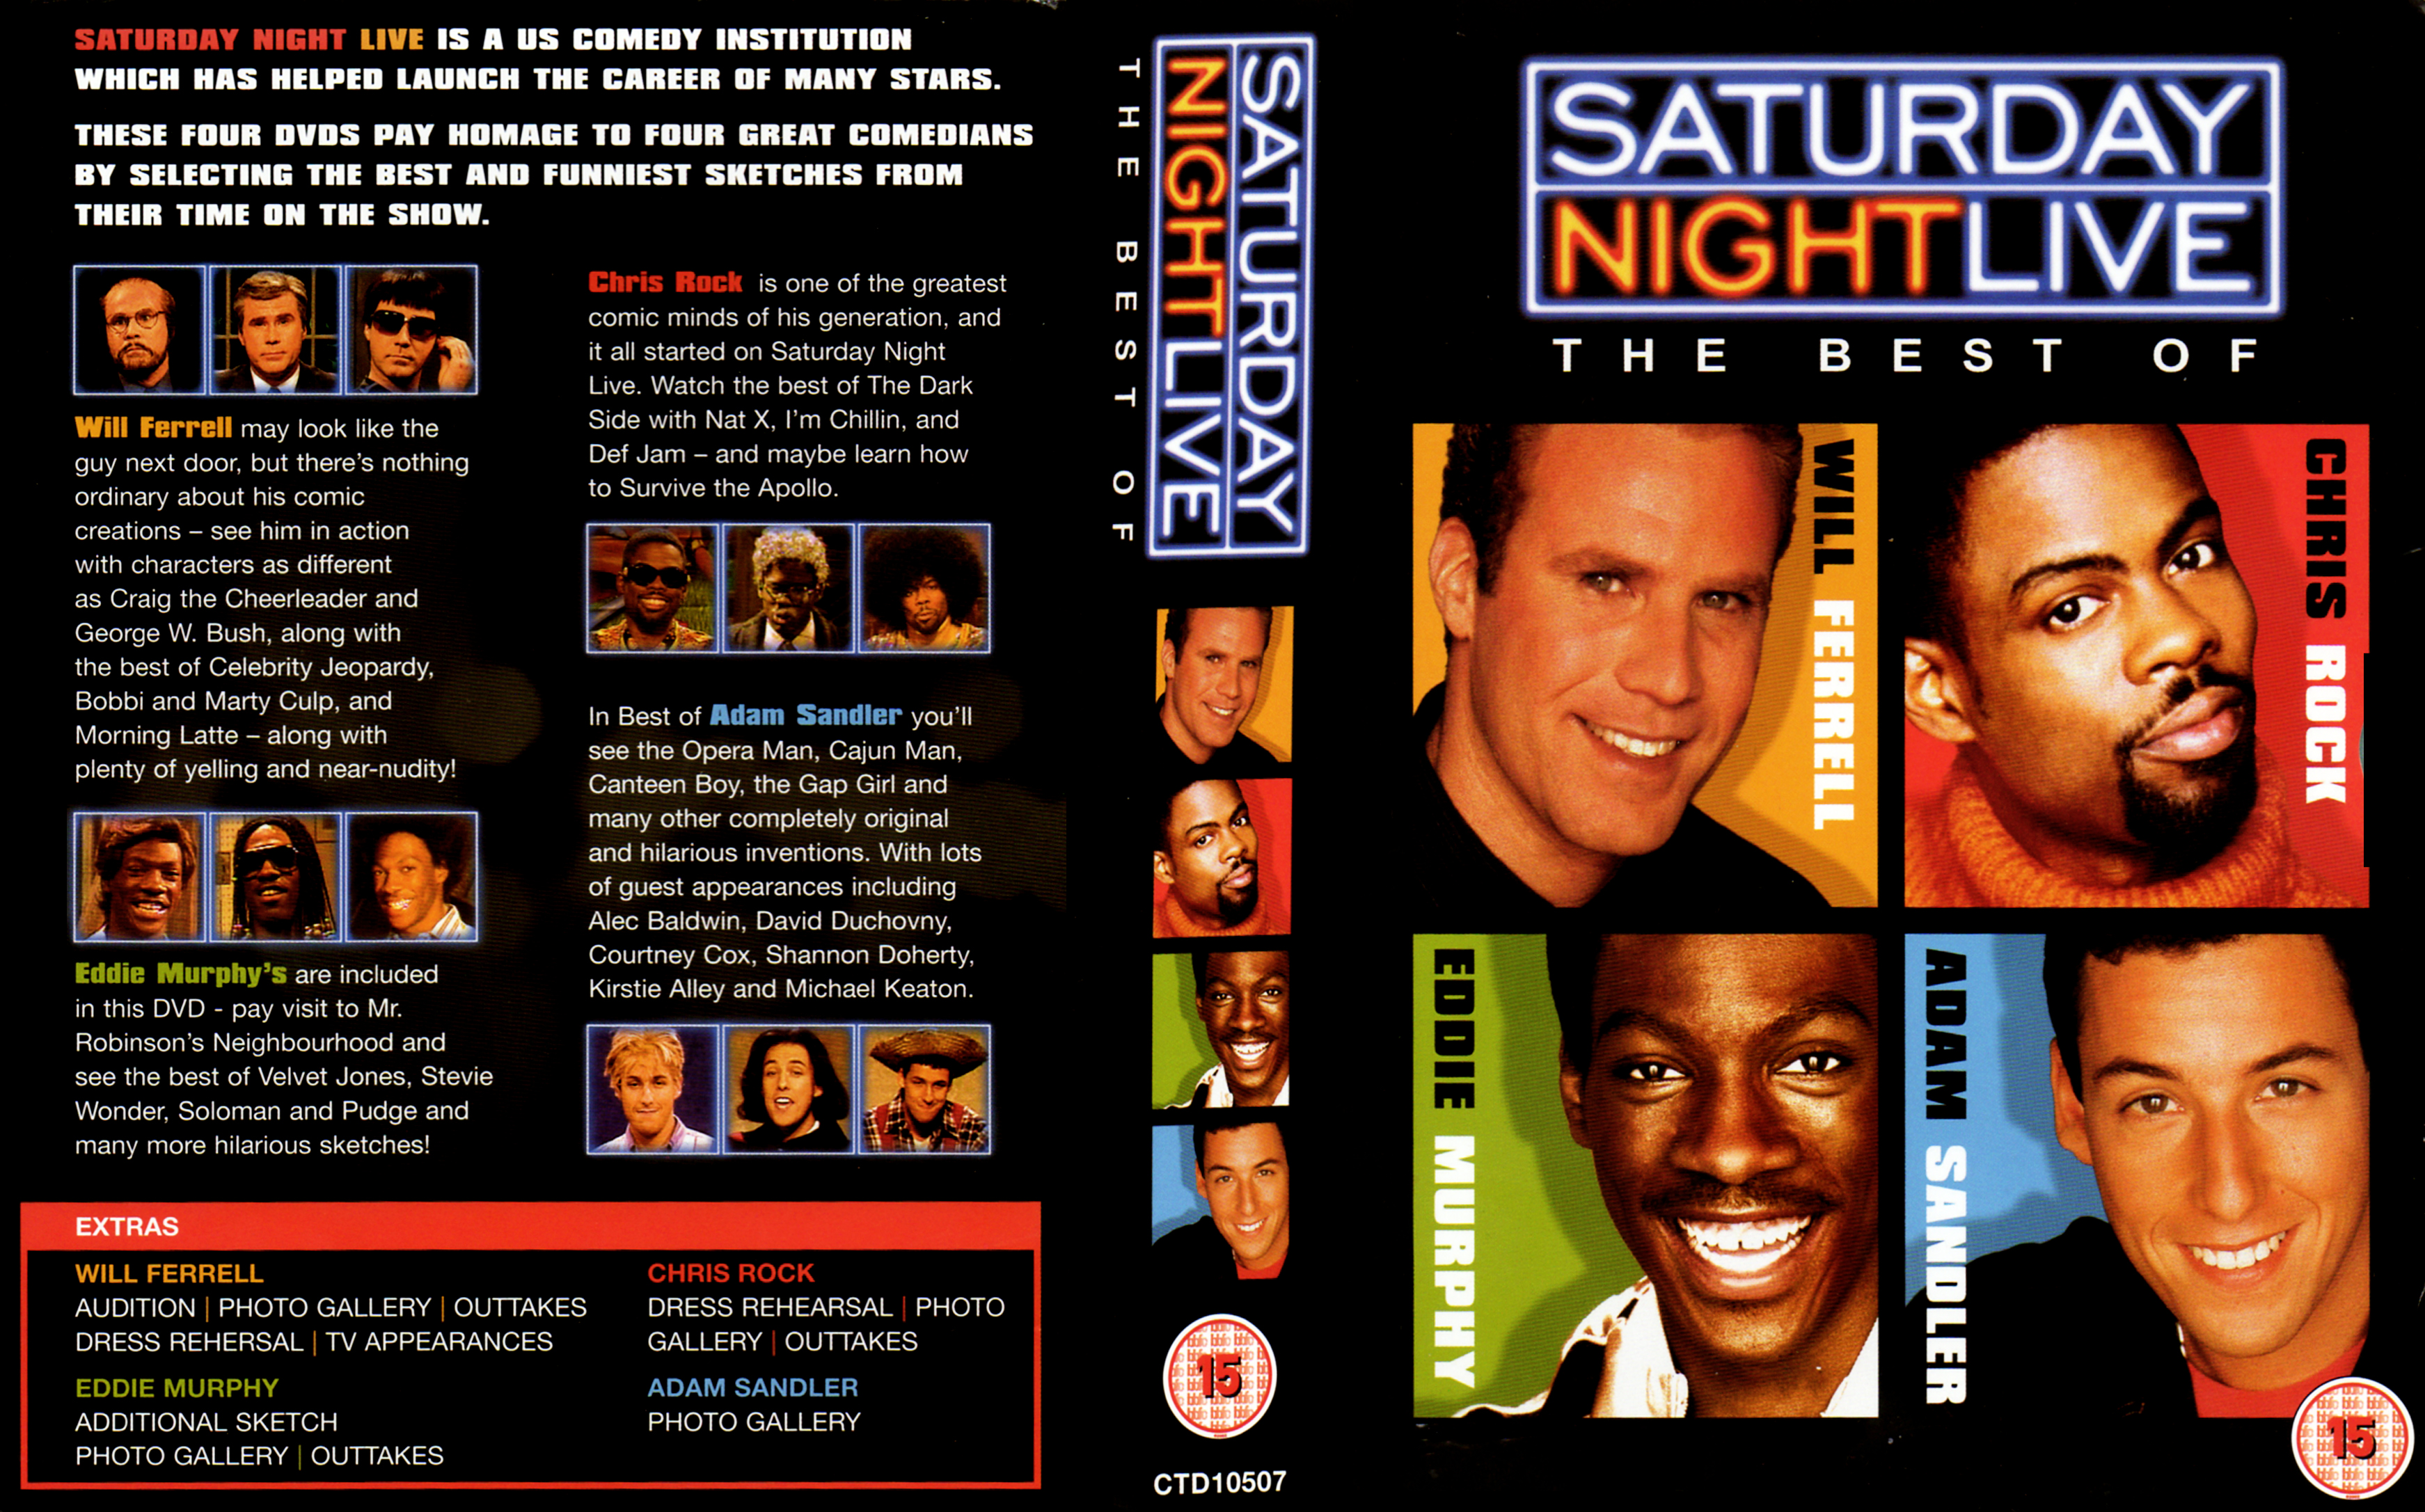 Jaquette DVD Saturday night live The best of Zone 1